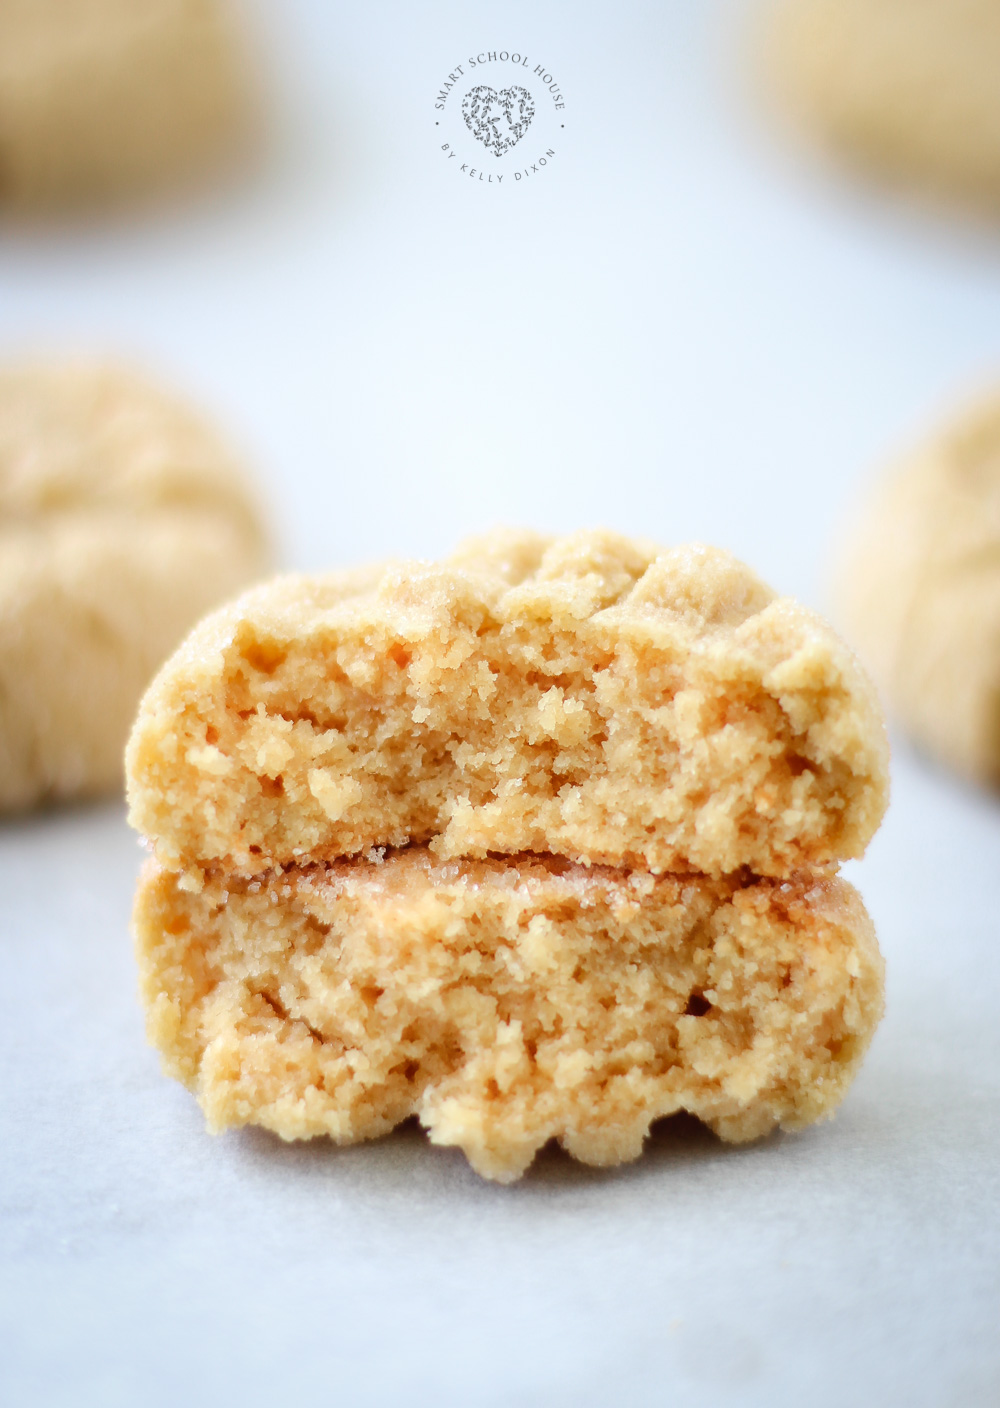 These Cake Mix Peanut Butter Cookies are ultra-rich in flavor, soft, chewy, easy to make, and topped with a sweet sugar coating.